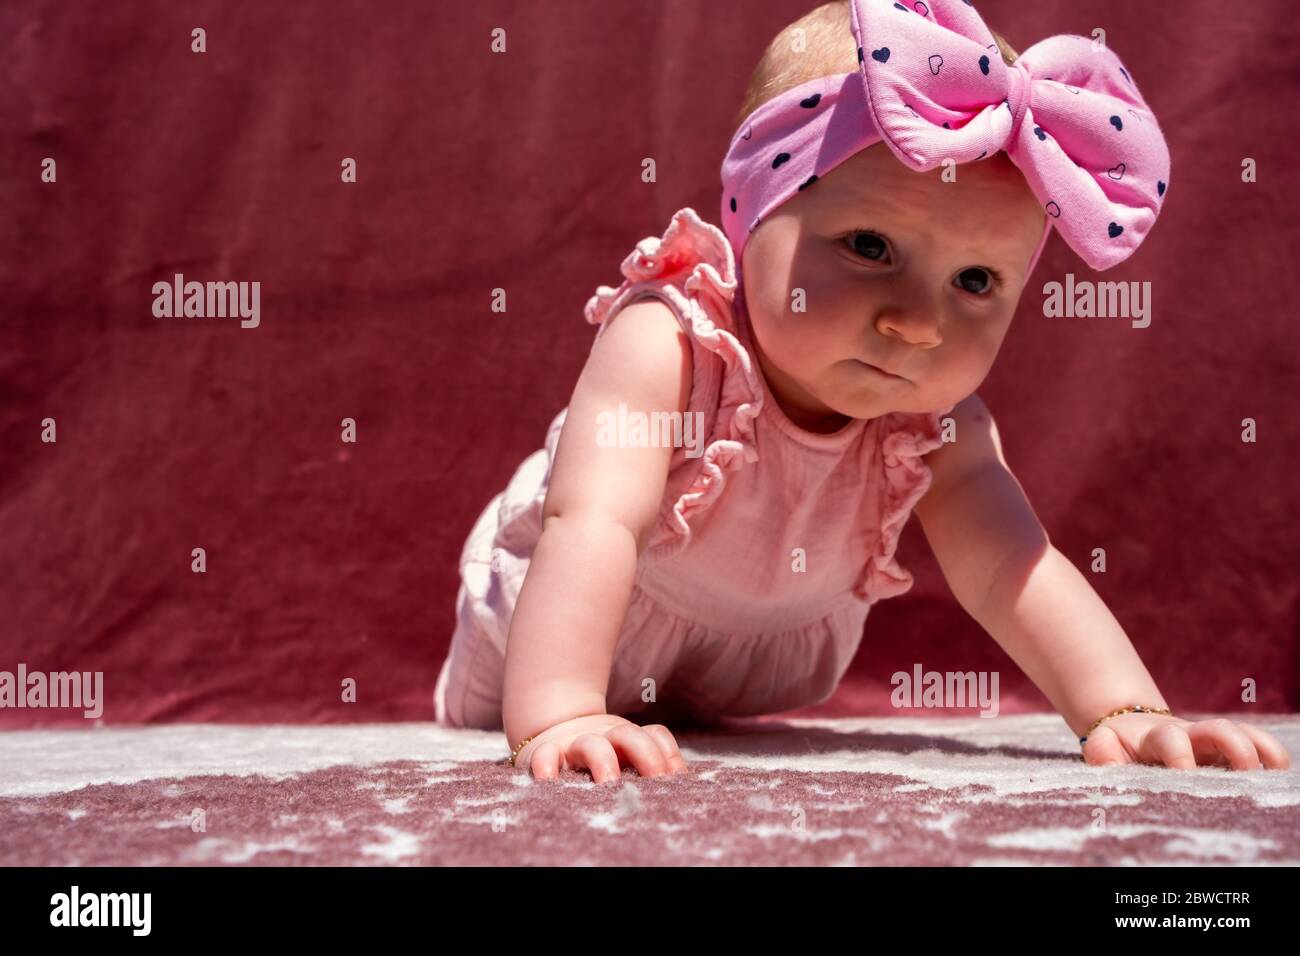 Cute baby girl wear adorable hat doing push-up outdoors, looking at camera and smiling on red background Stock Photo